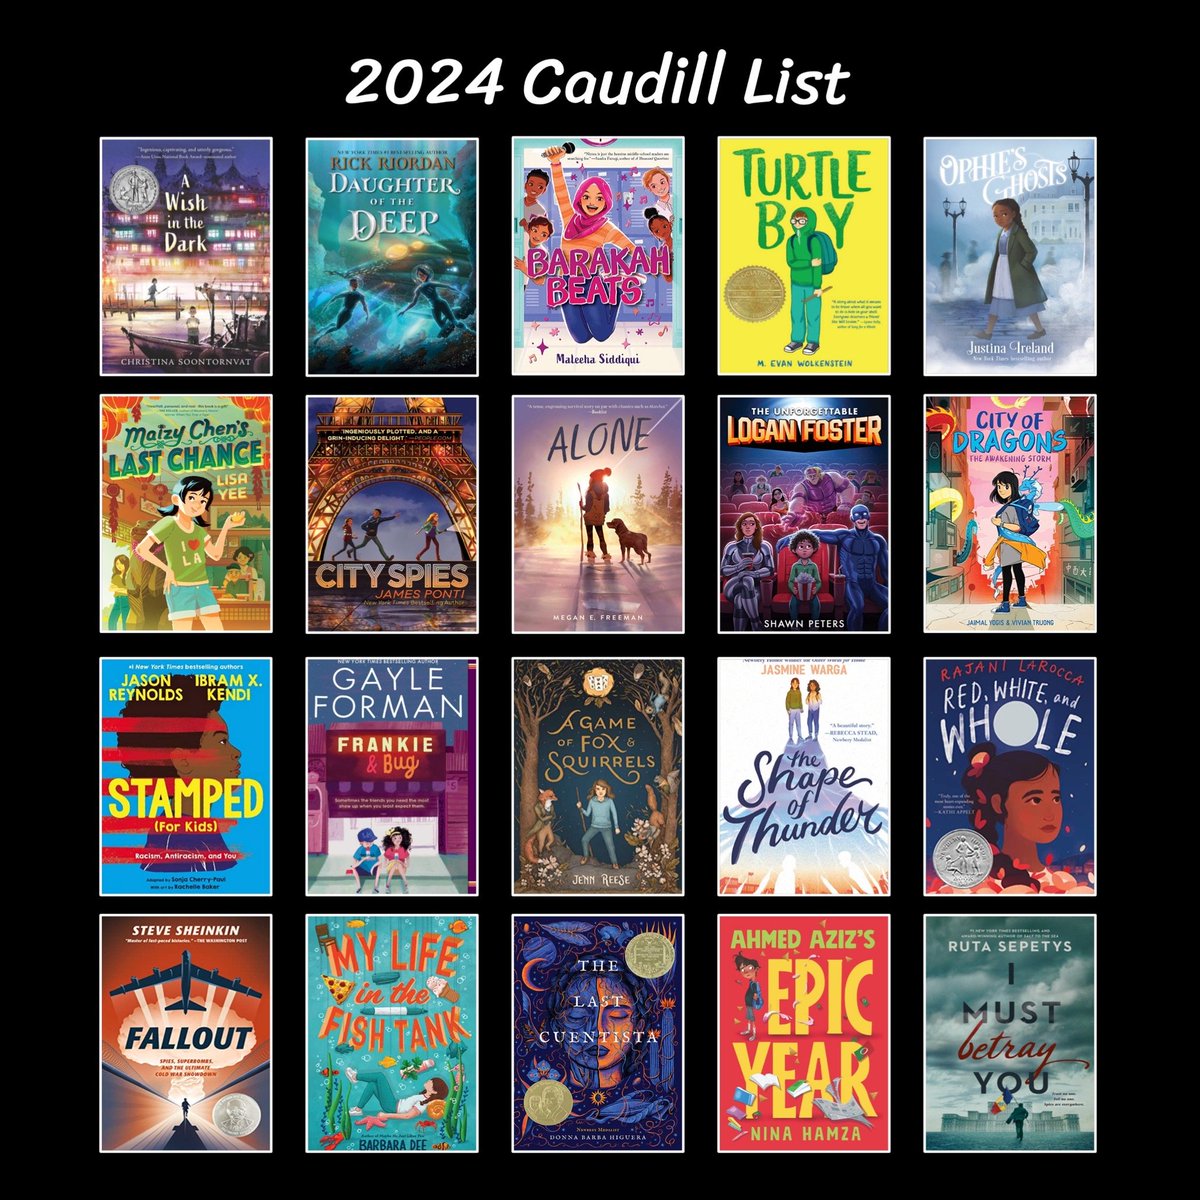 Be sure to submit your students' votes for their favorite books from the 2024 #Caudill list!! Voting is open until February 29. We're so excited to see which book wins this year's award!! rebeccacaudill.org